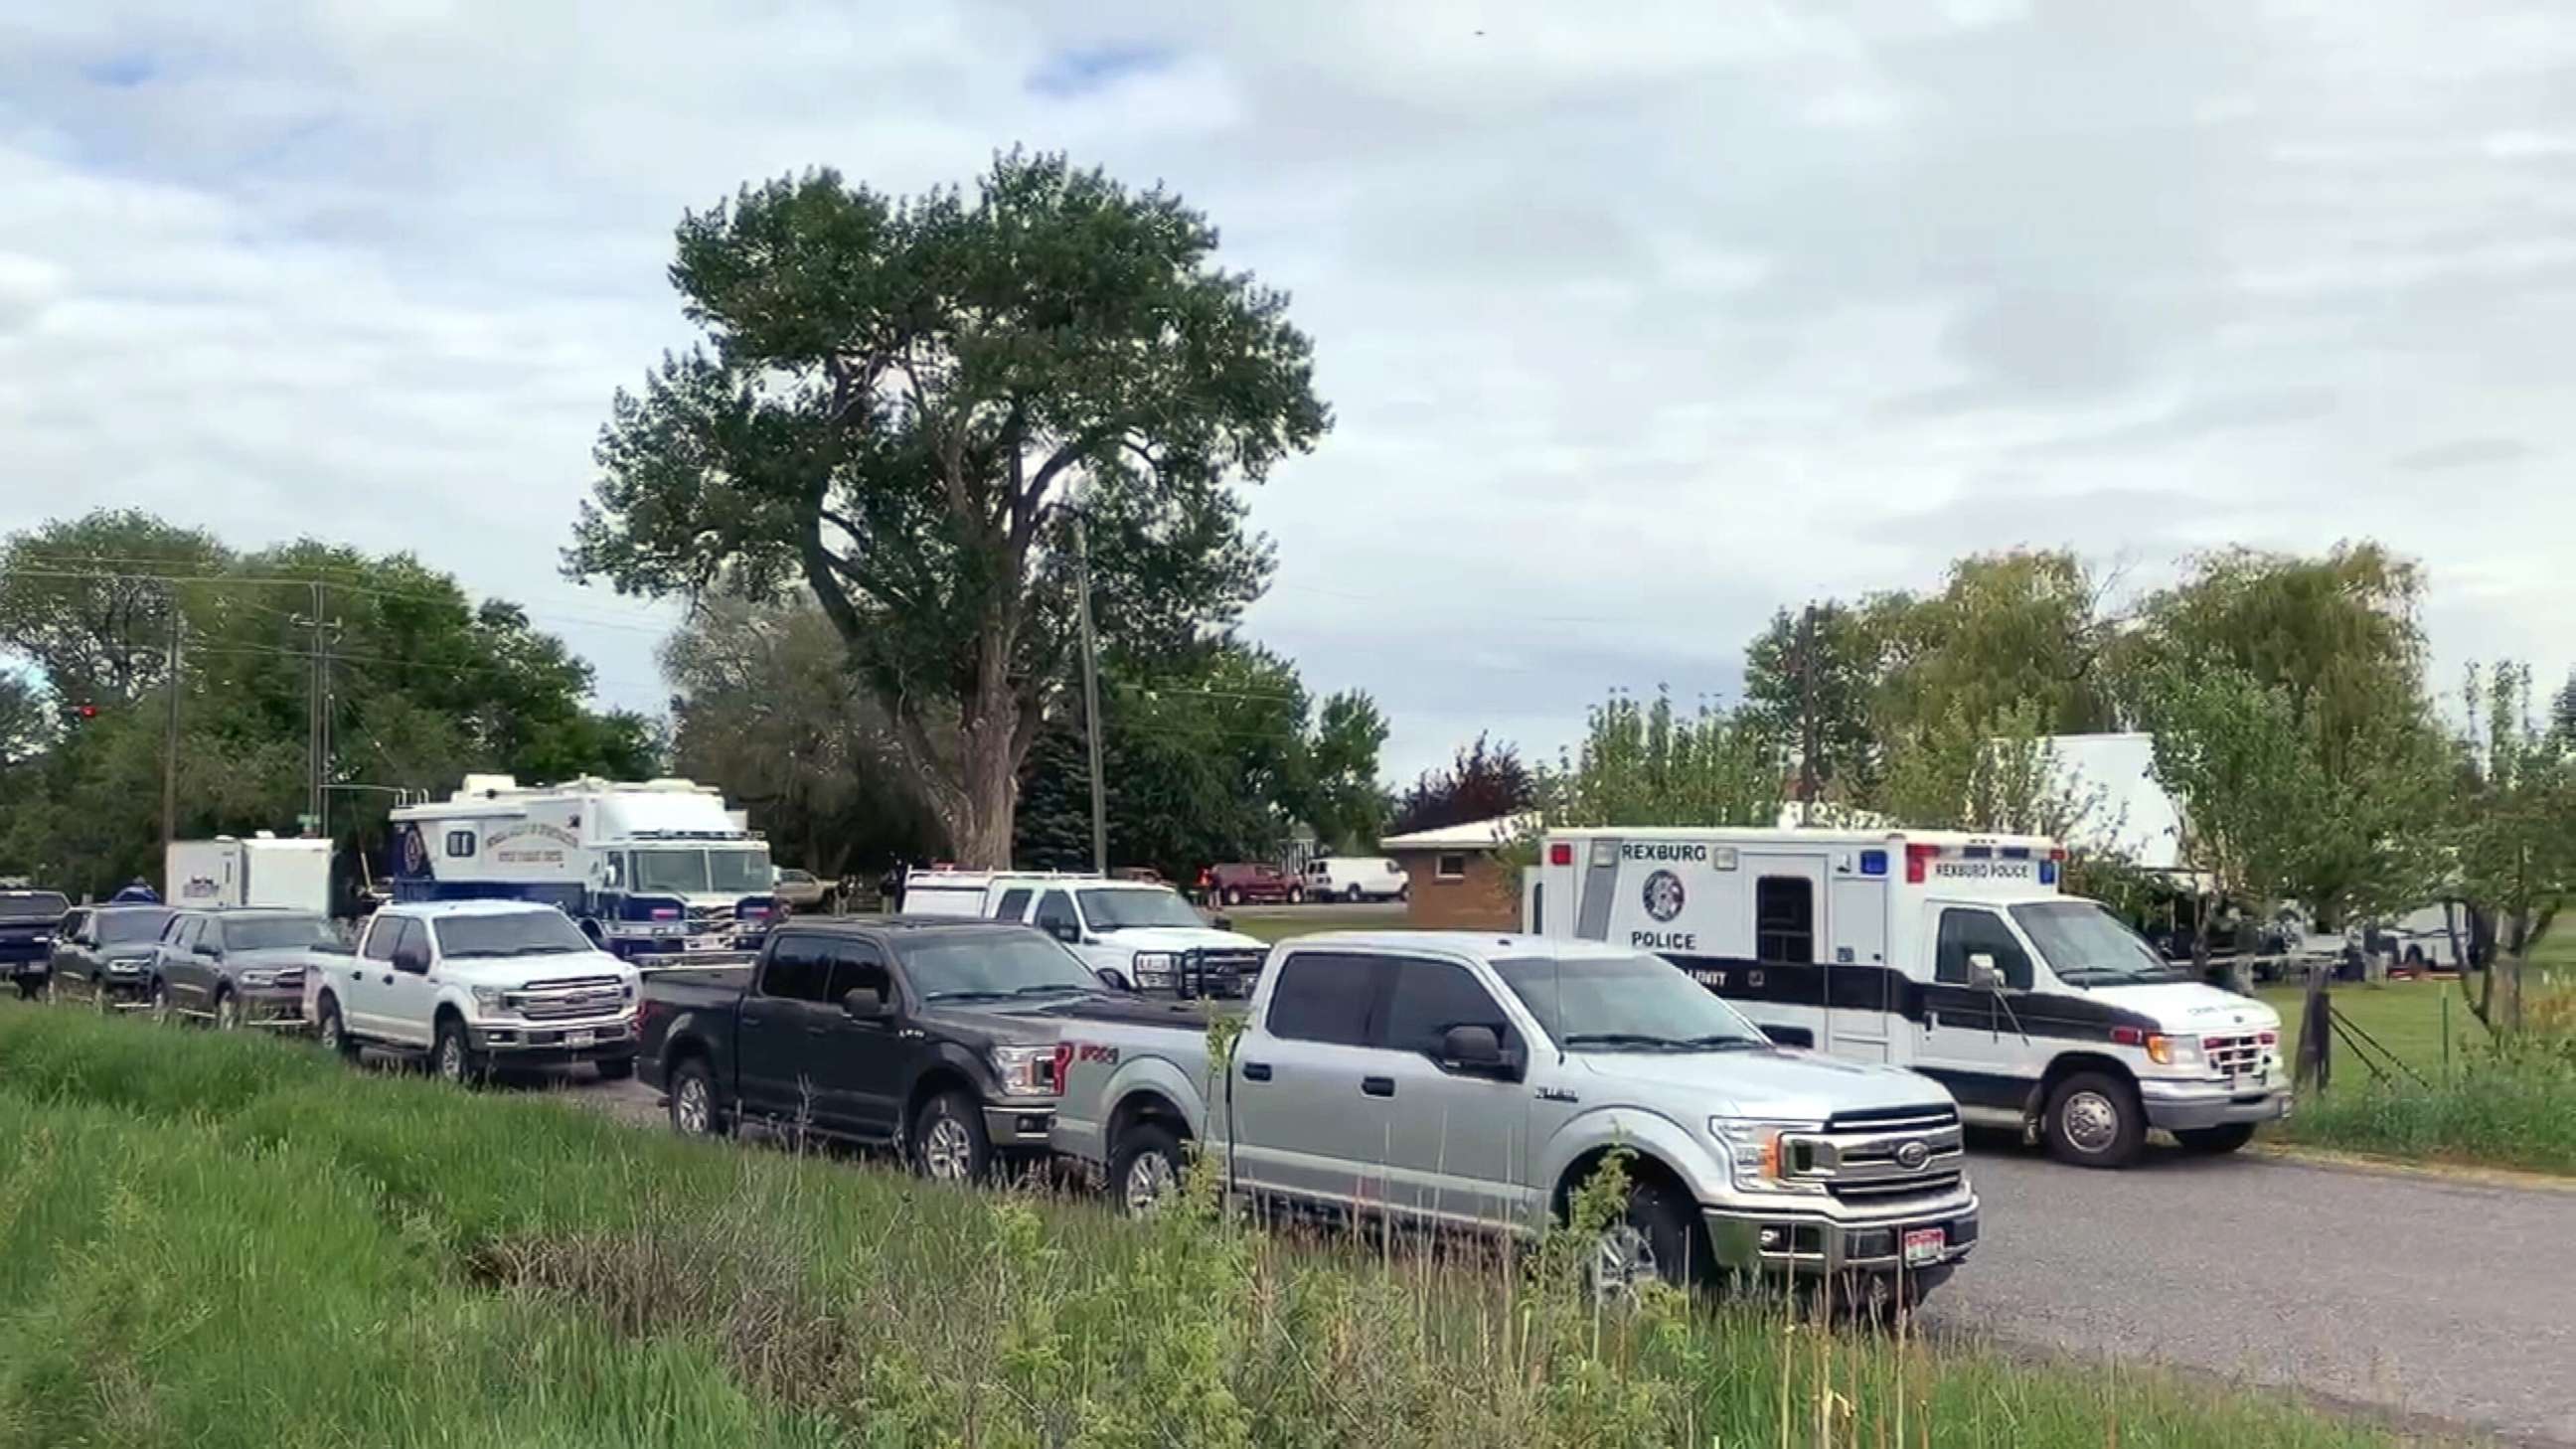 PHOTO: Authorities at the property of Chad Daybell, who was taken into custody following the finding of human remains at his property in Idaho, June 9, 2020.